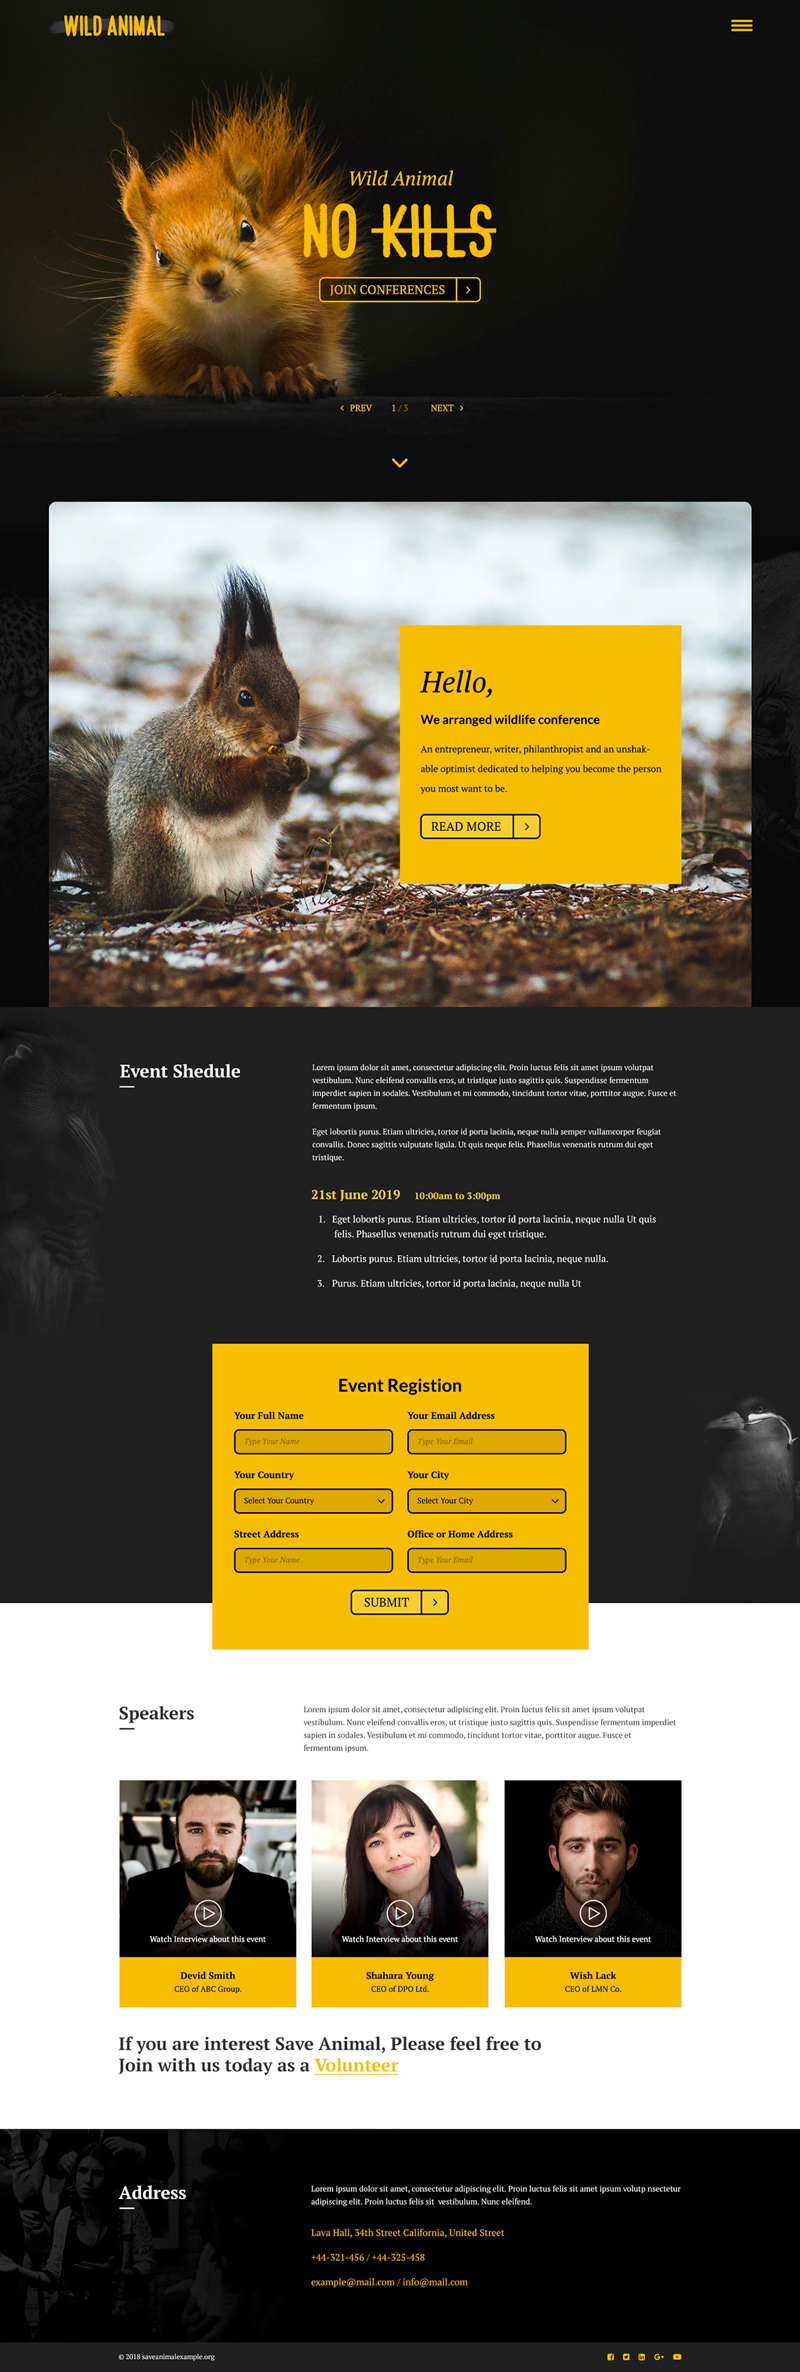 Wild Animal – Conference Landing Page For Adobe XD